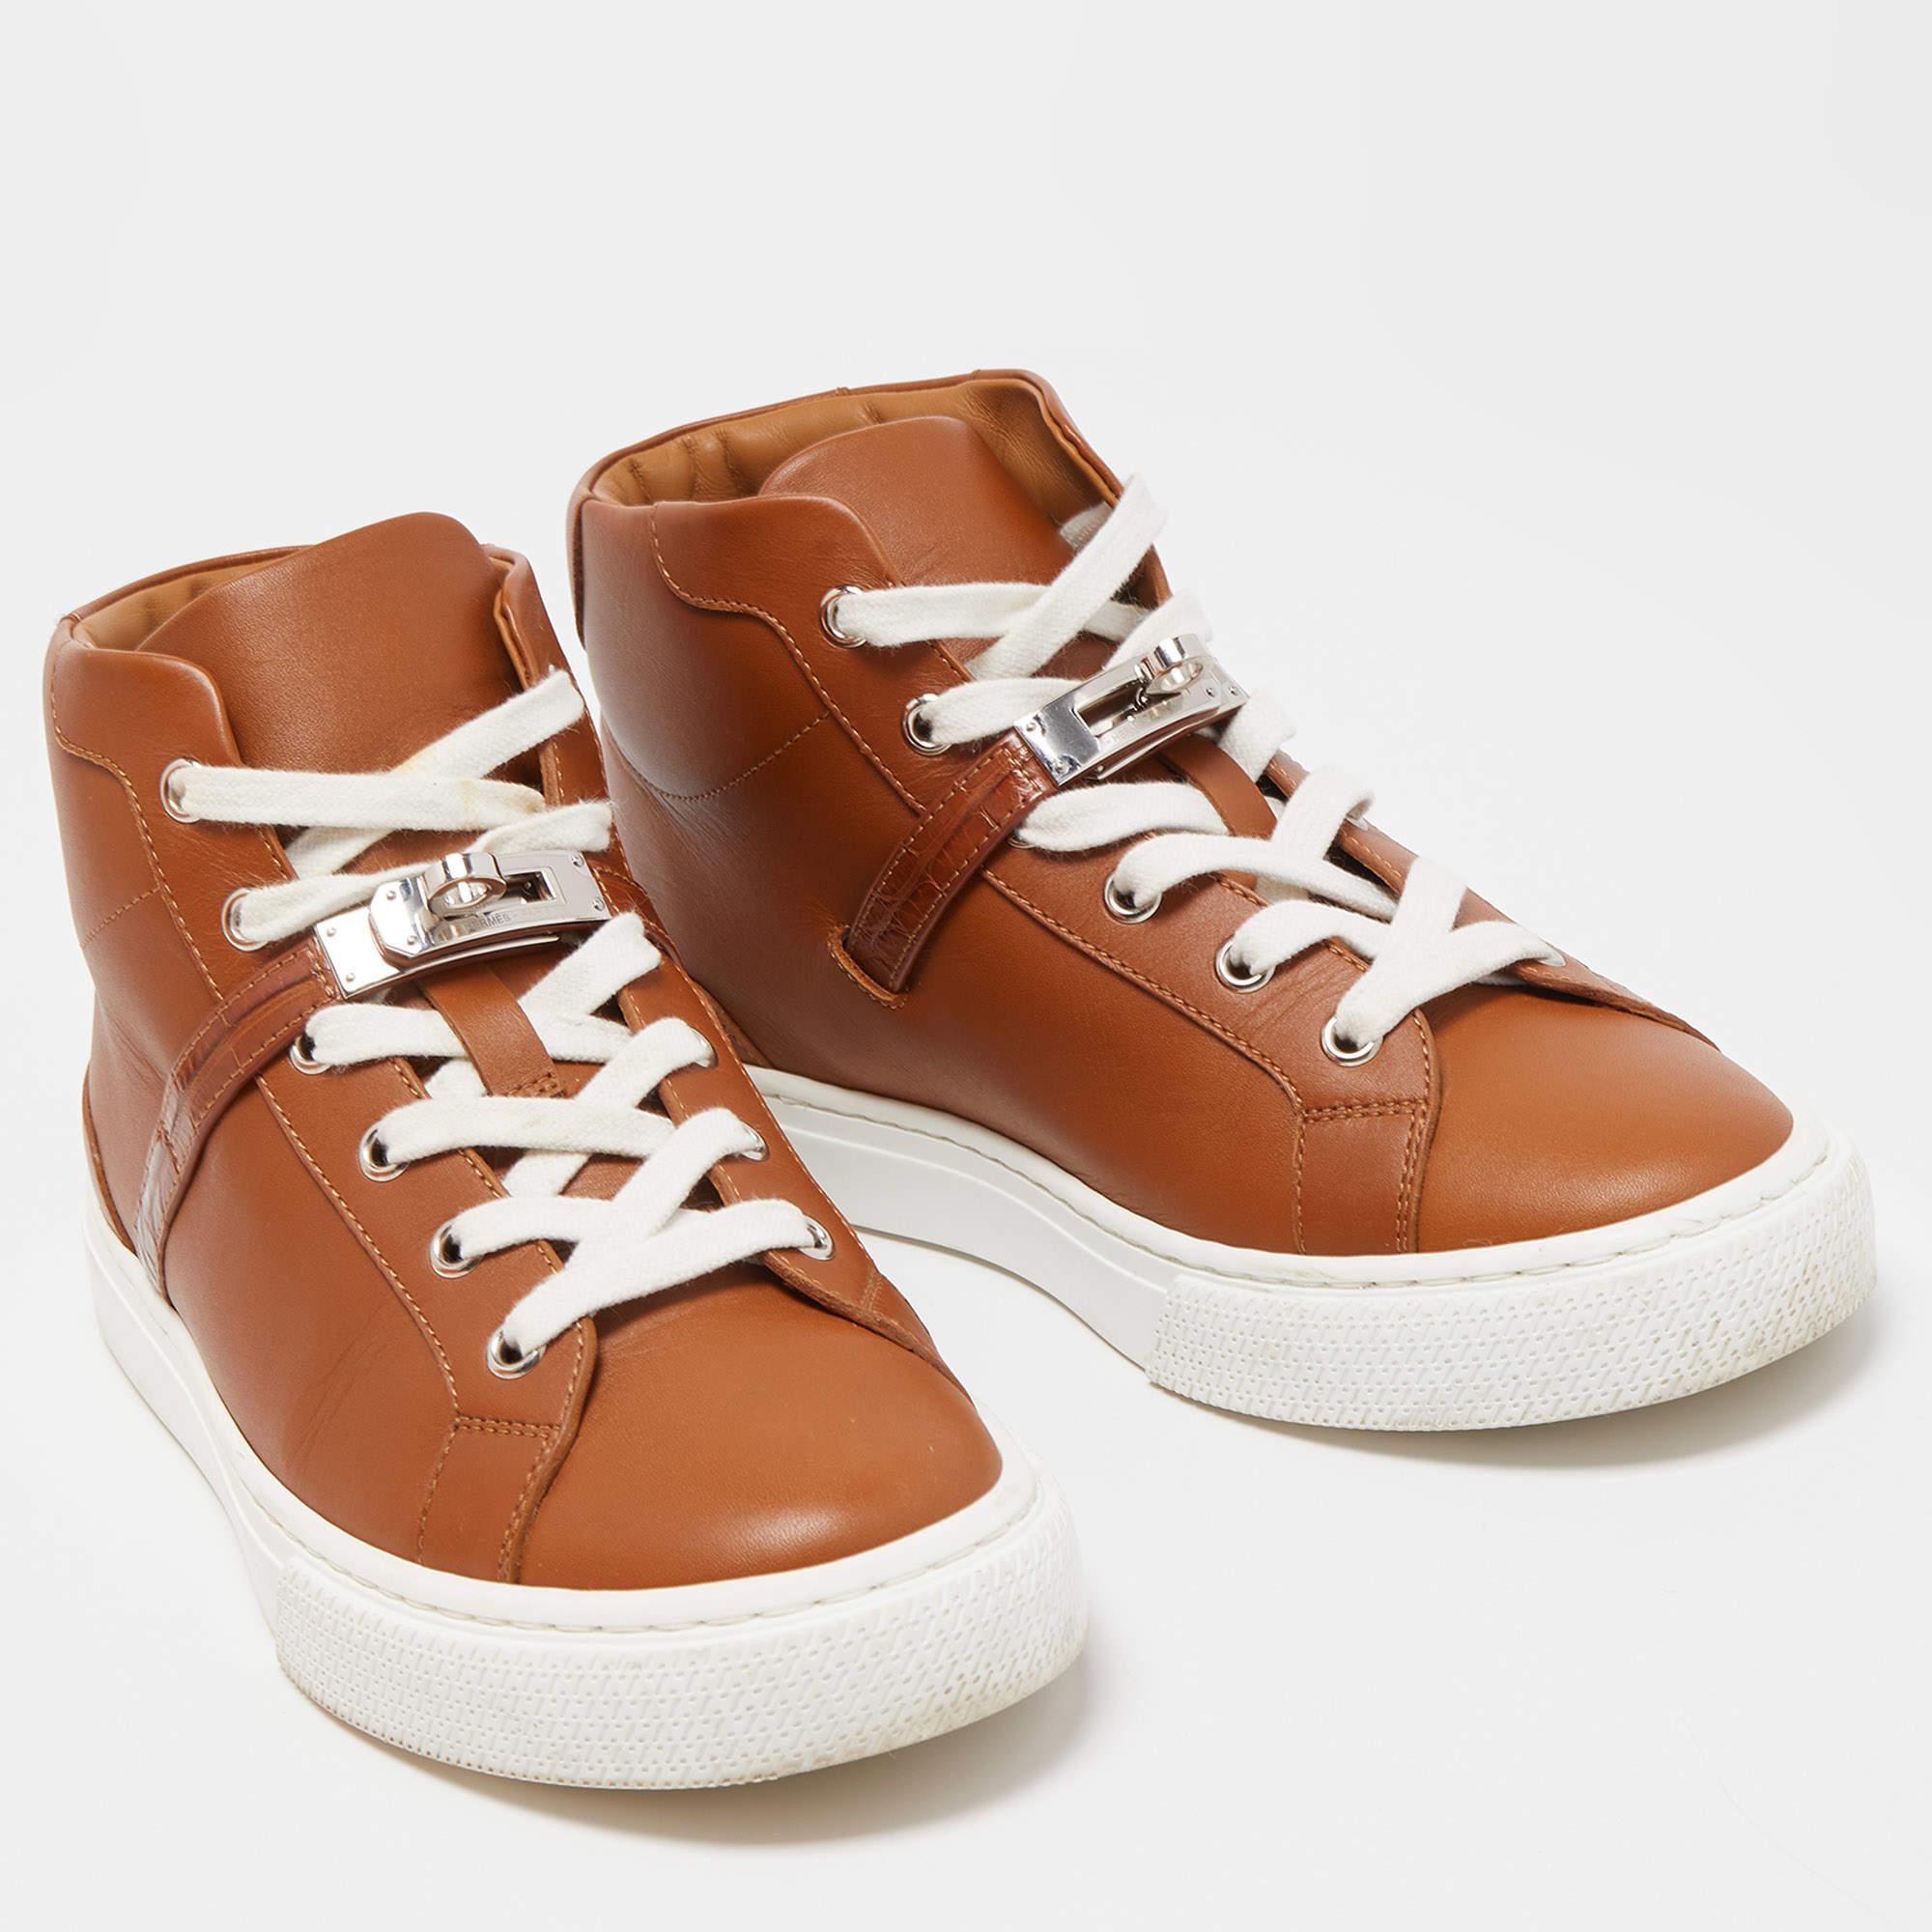 Hermes Brown Leather Daydream High Top Sneakers Size 37.5 1